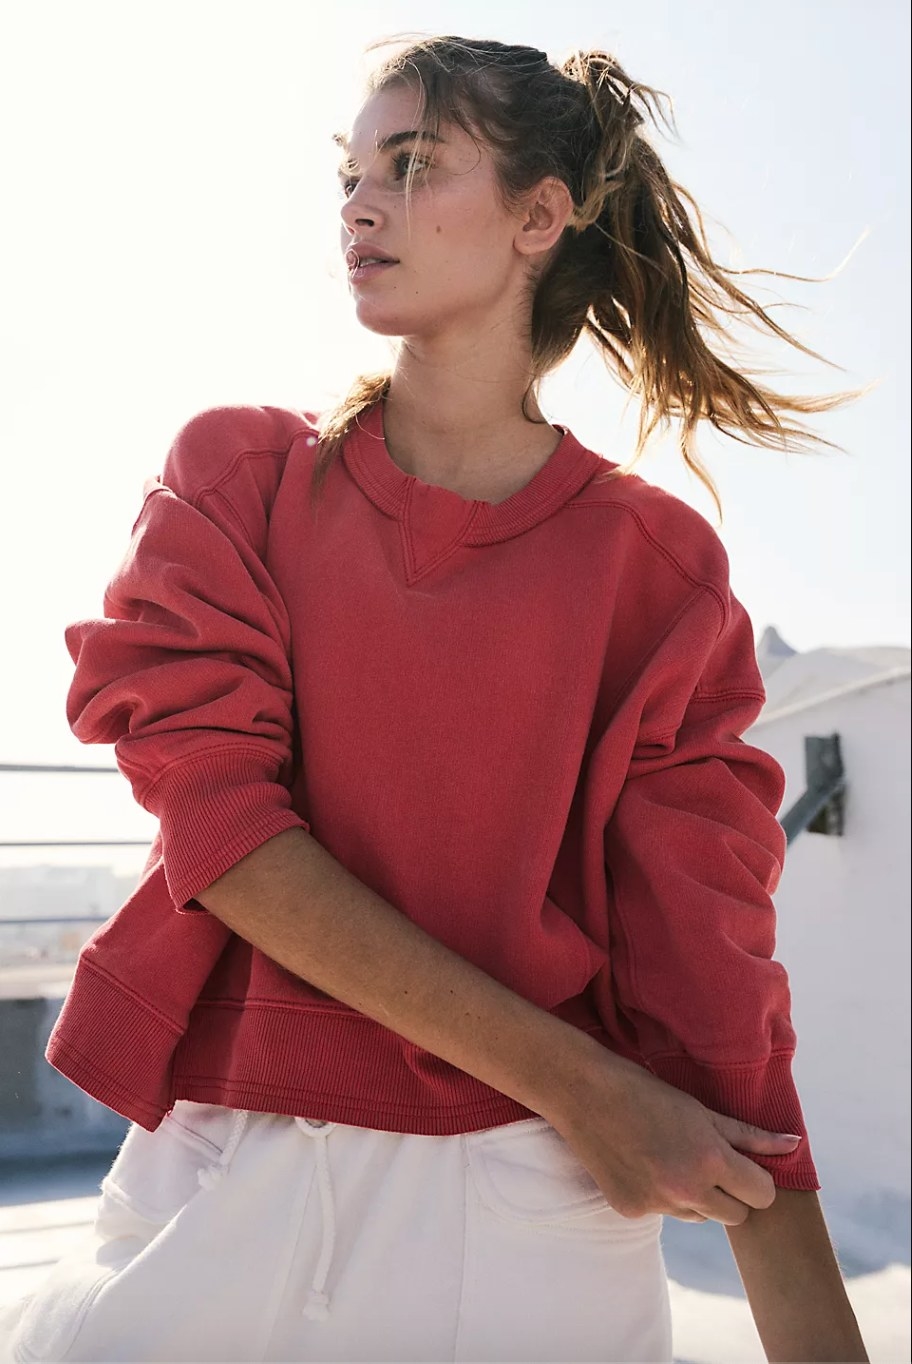 a model wearing the read sweatshirt and white pants